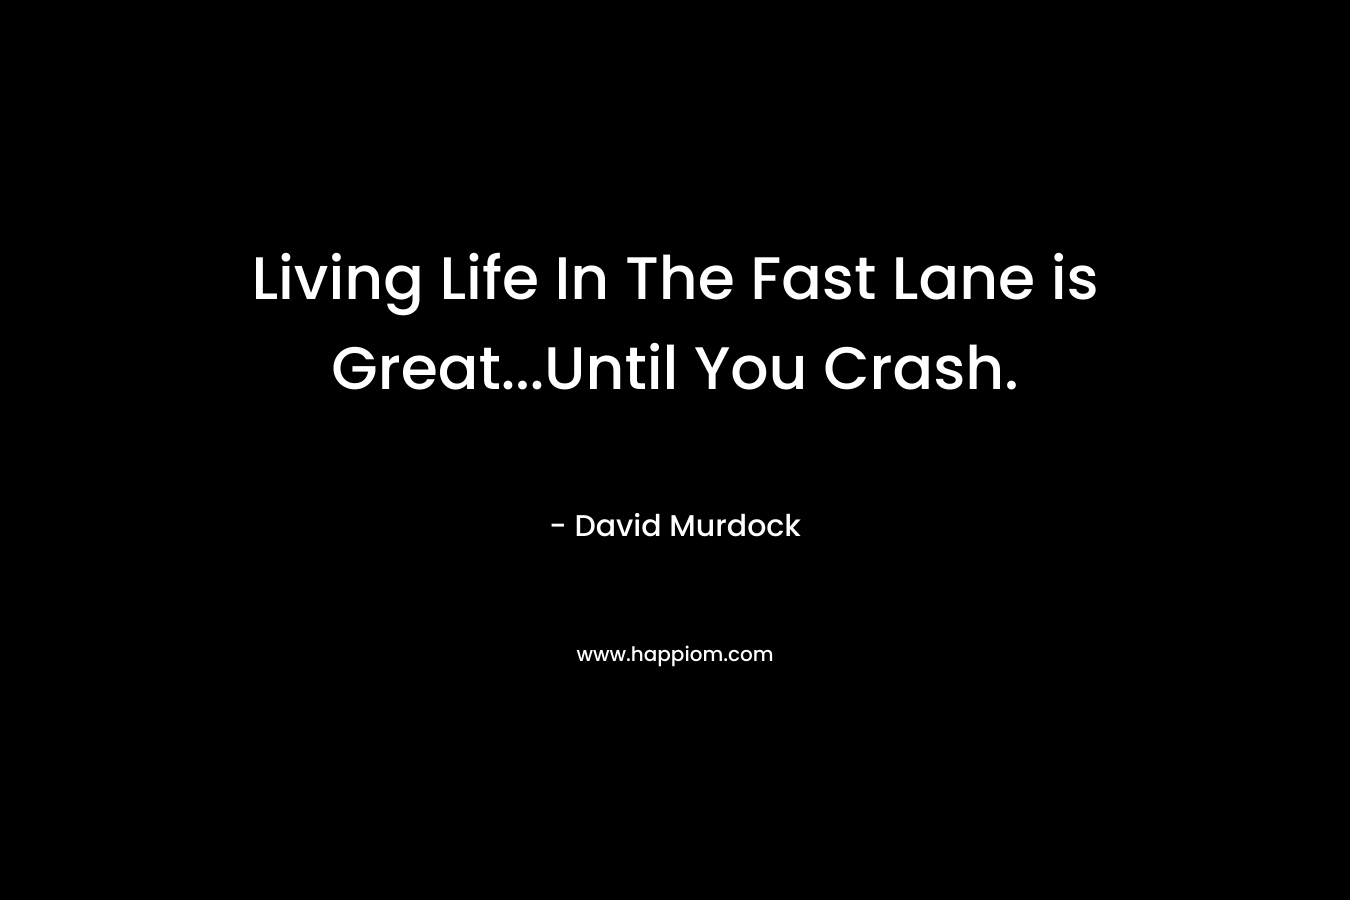 Living Life In The Fast Lane is Great…Until You Crash. – David Murdock